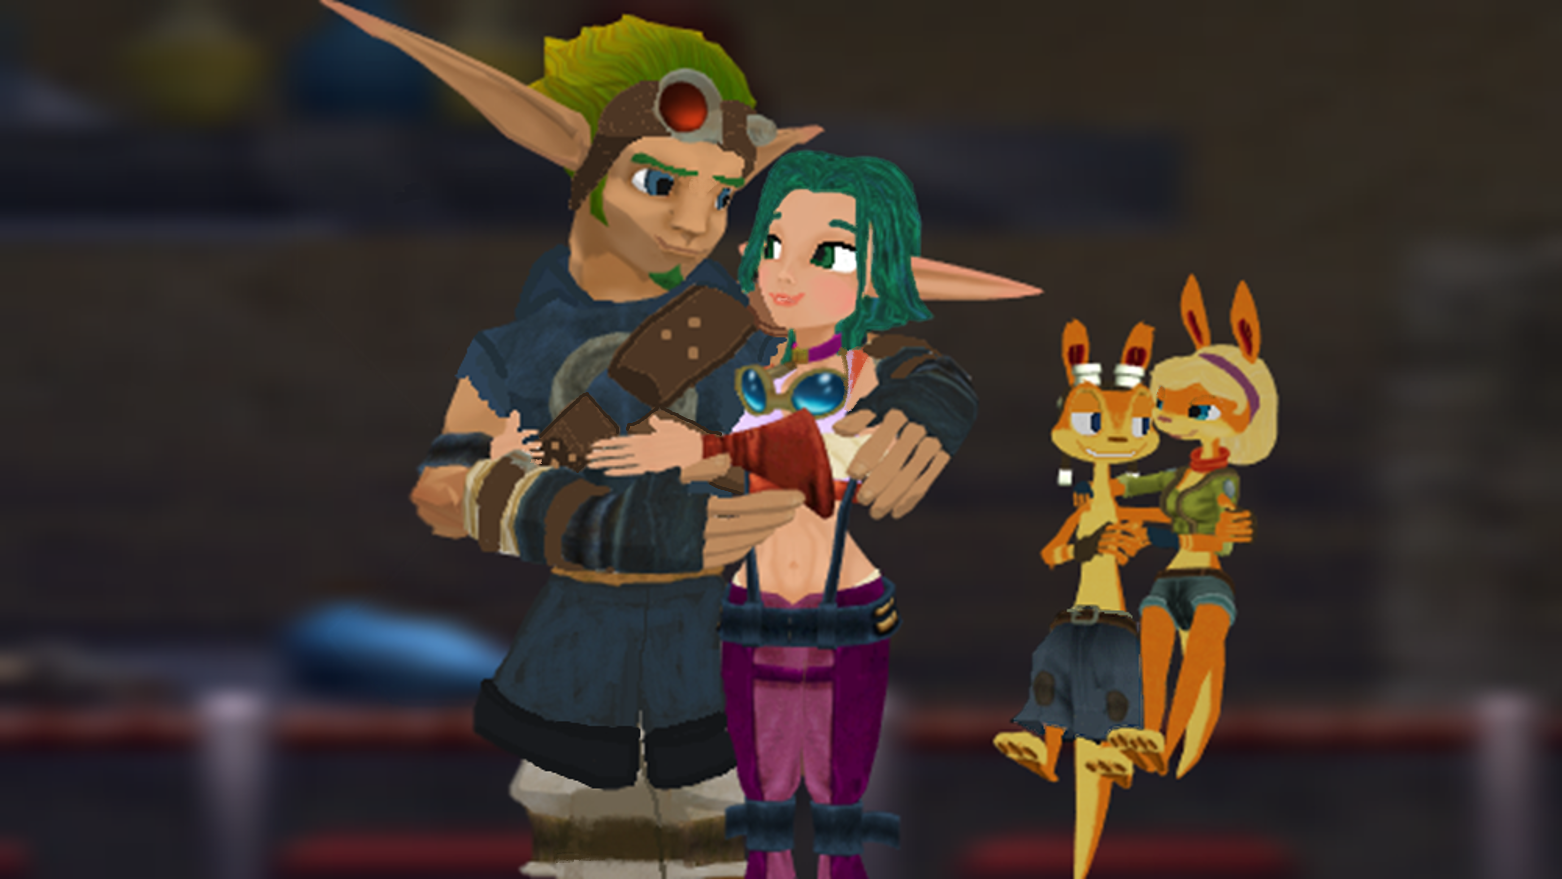 Photo of Jak x Keira Hagai and Daxter x Tess Double Date for fans of Jak an...